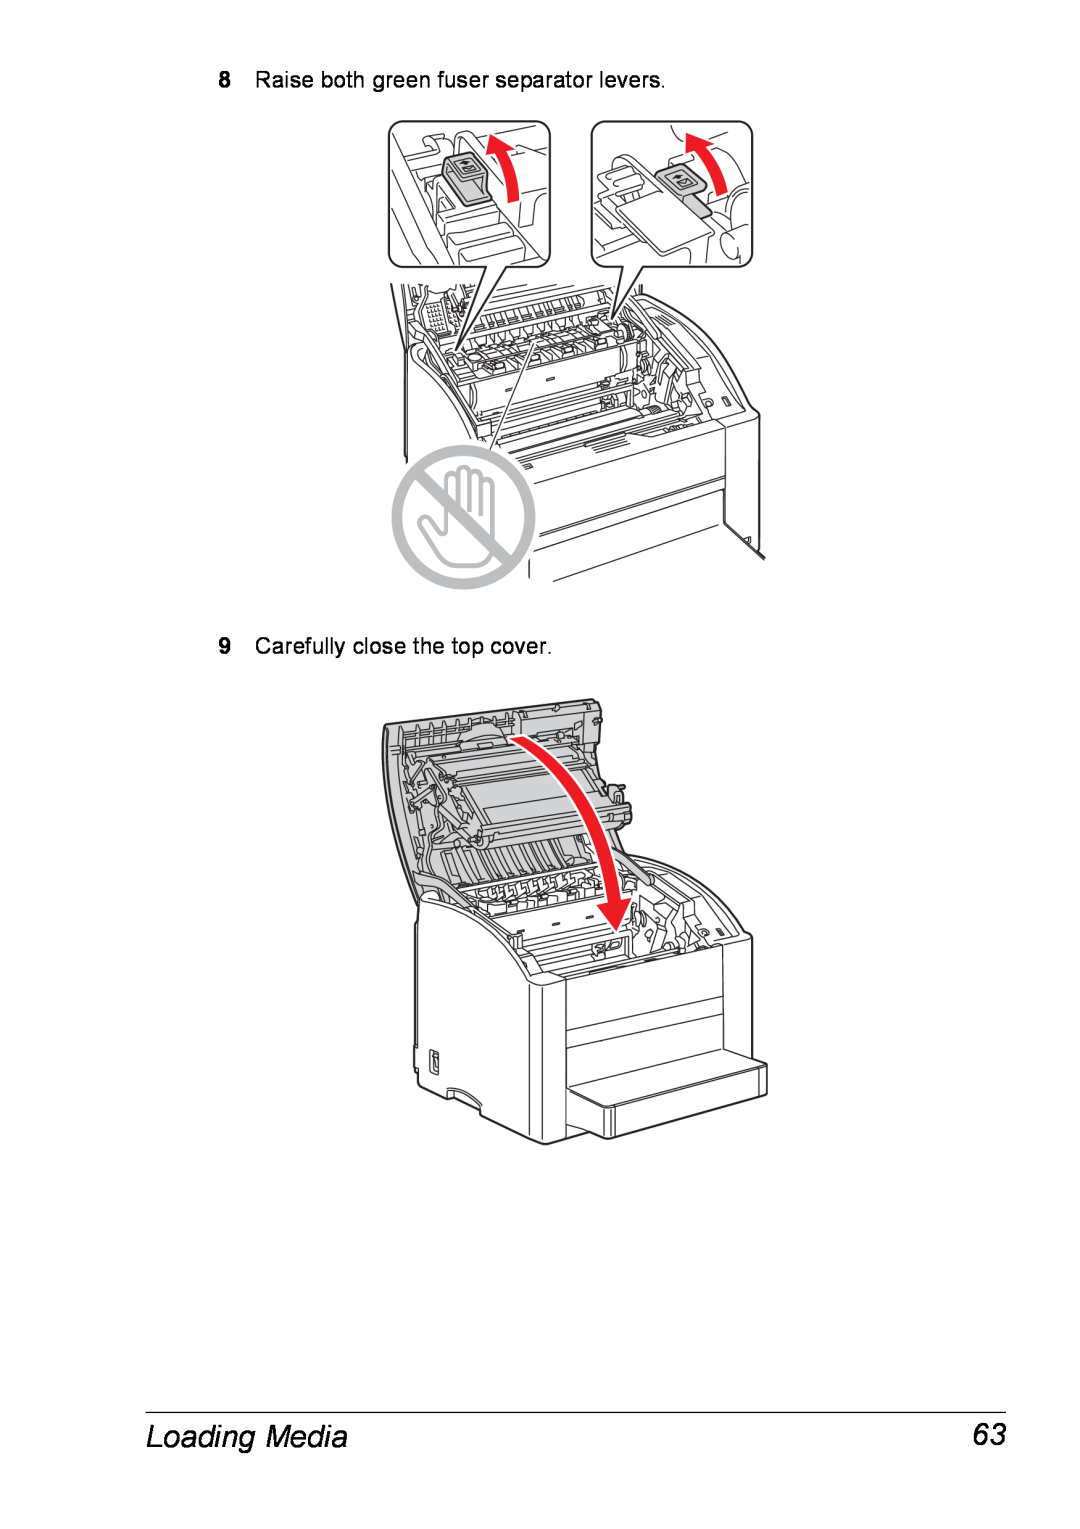 Xerox 6120 manual Loading Media, Raise both green fuser separator levers, Carefully close the top cover 